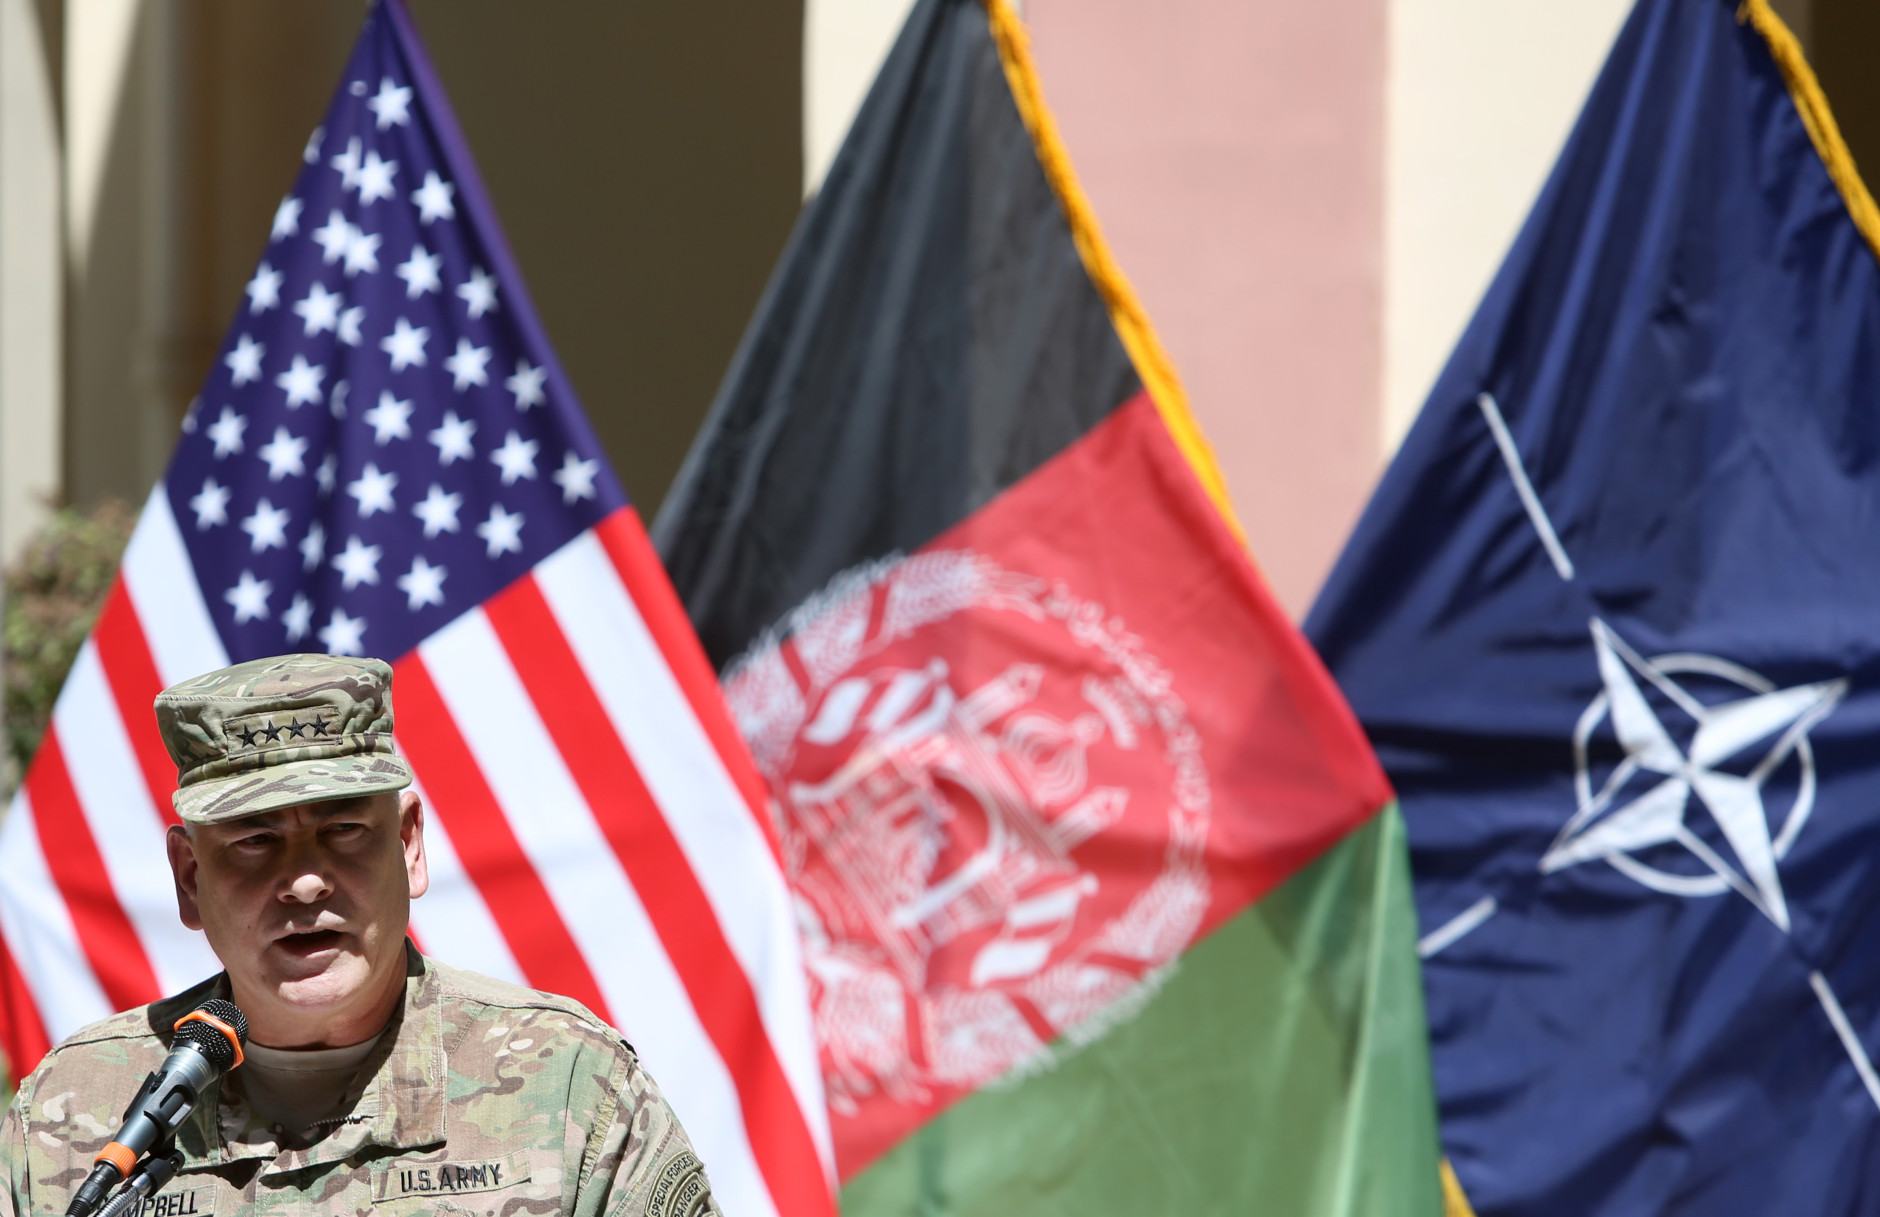 Commander of the International Security Assistance Force (ISAF), Gen. John Campbell, speaks during a memorial ceremony on the fourteenth anniversary of the 9-11 terrorist attacks on the United States at the headquarters of the International Security Assistance Force, in Kabul, Afghanistan, Friday, Sept. 11, 2015. (AP Photo/Rahmat Gul)